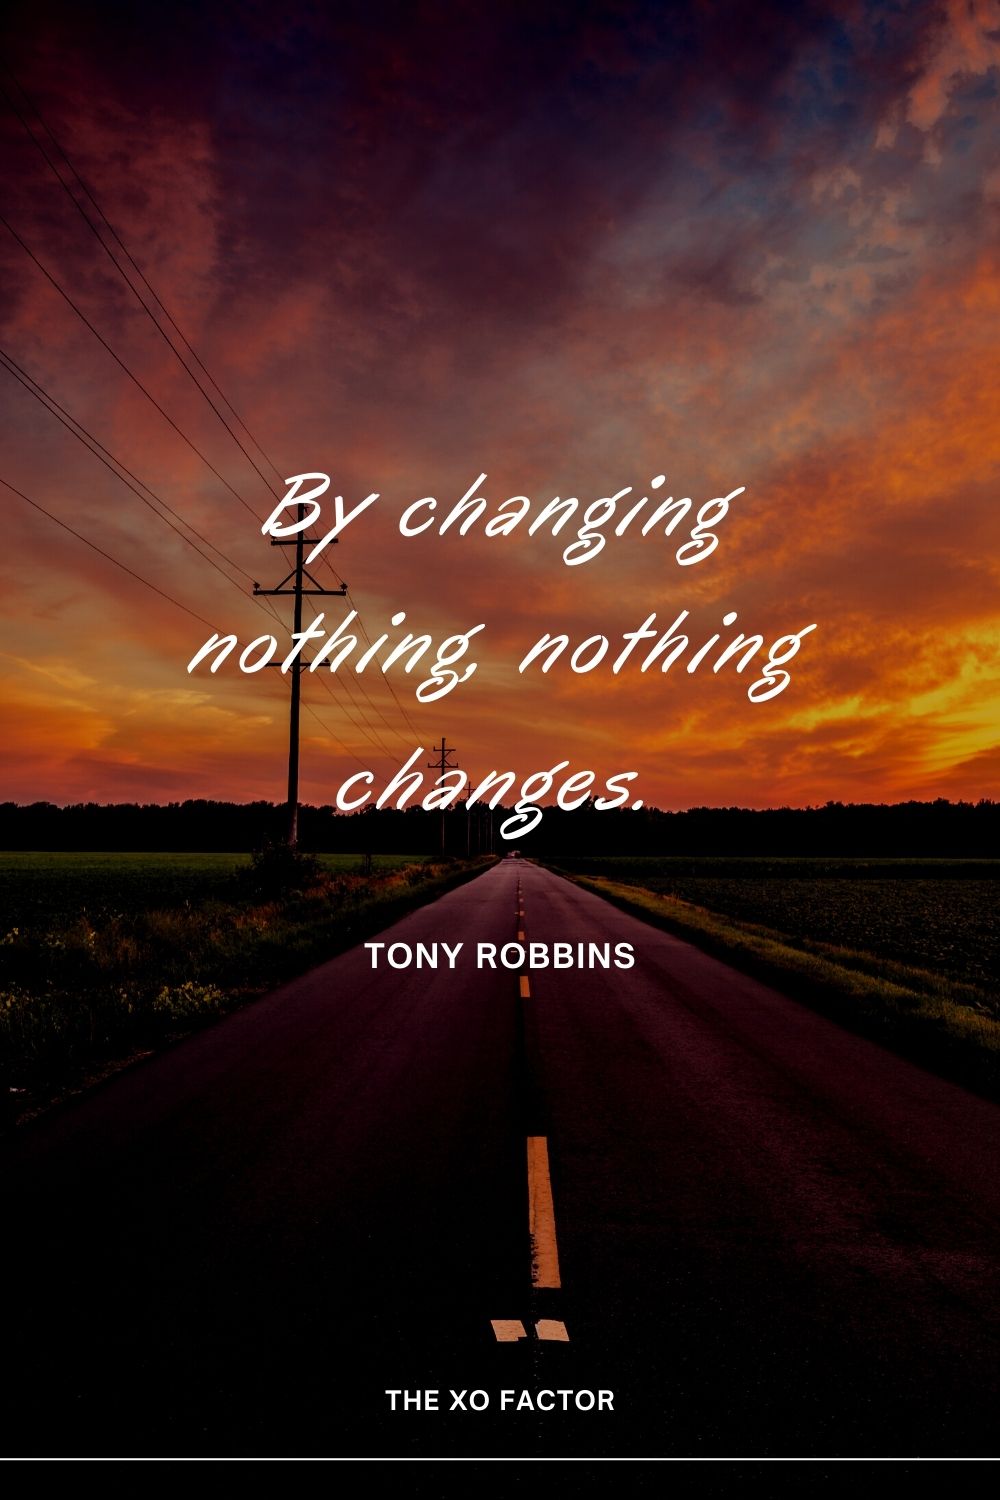 By changing nothing, nothing changes. Tony Robbins